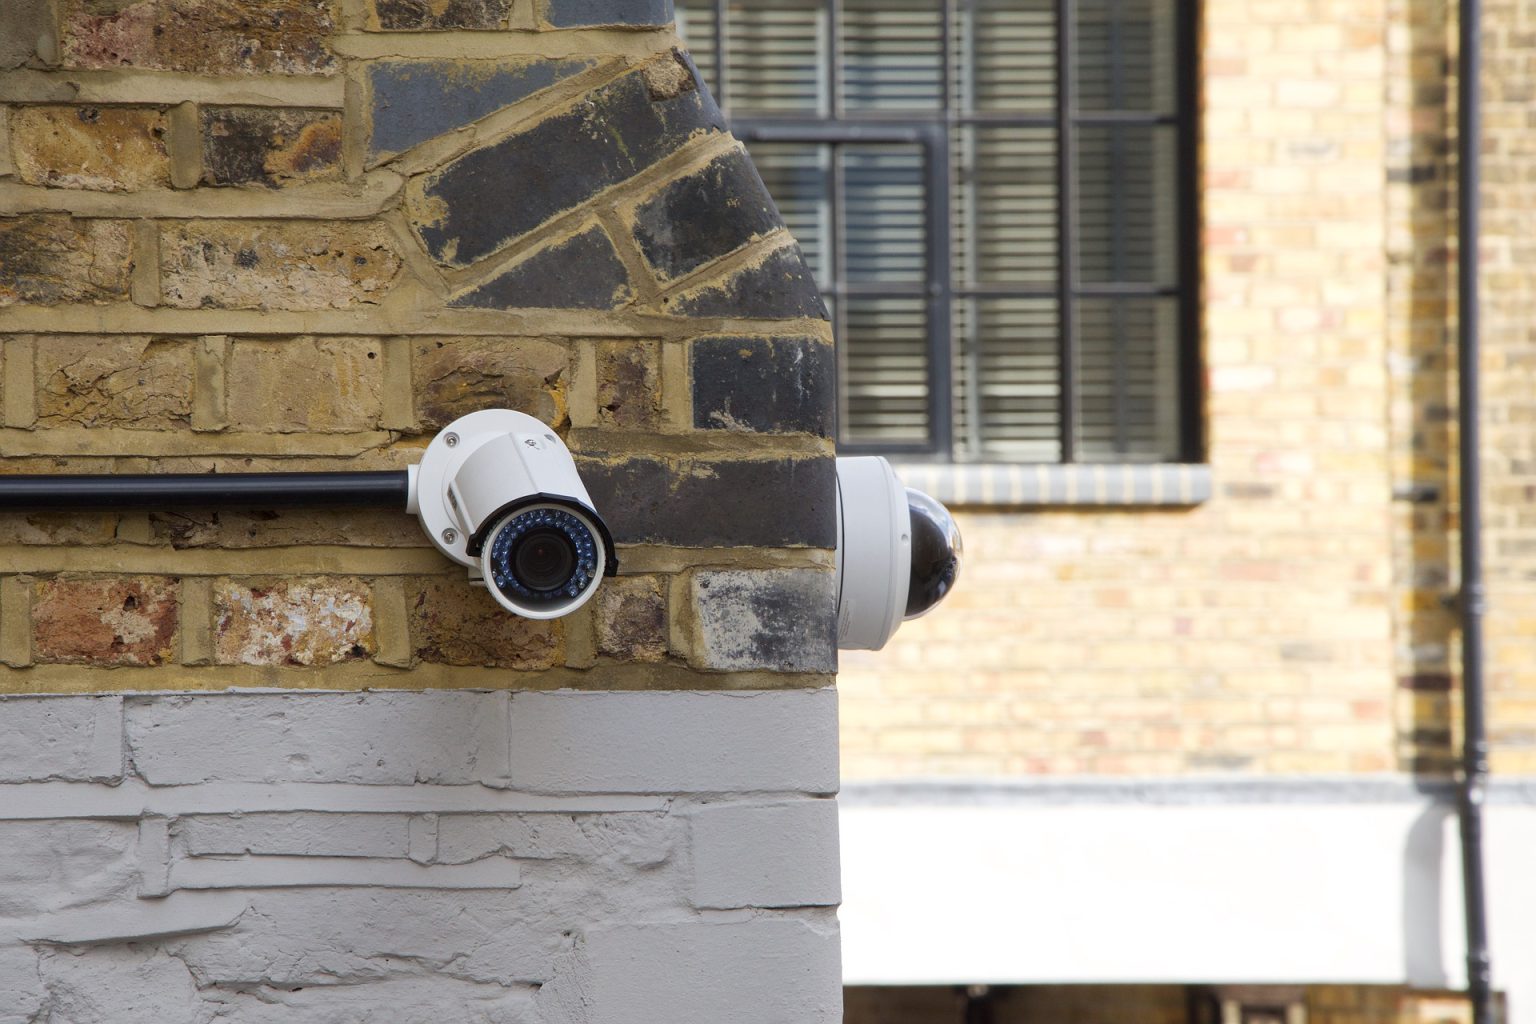 Security cameras professionally mounted on the exterior of a building